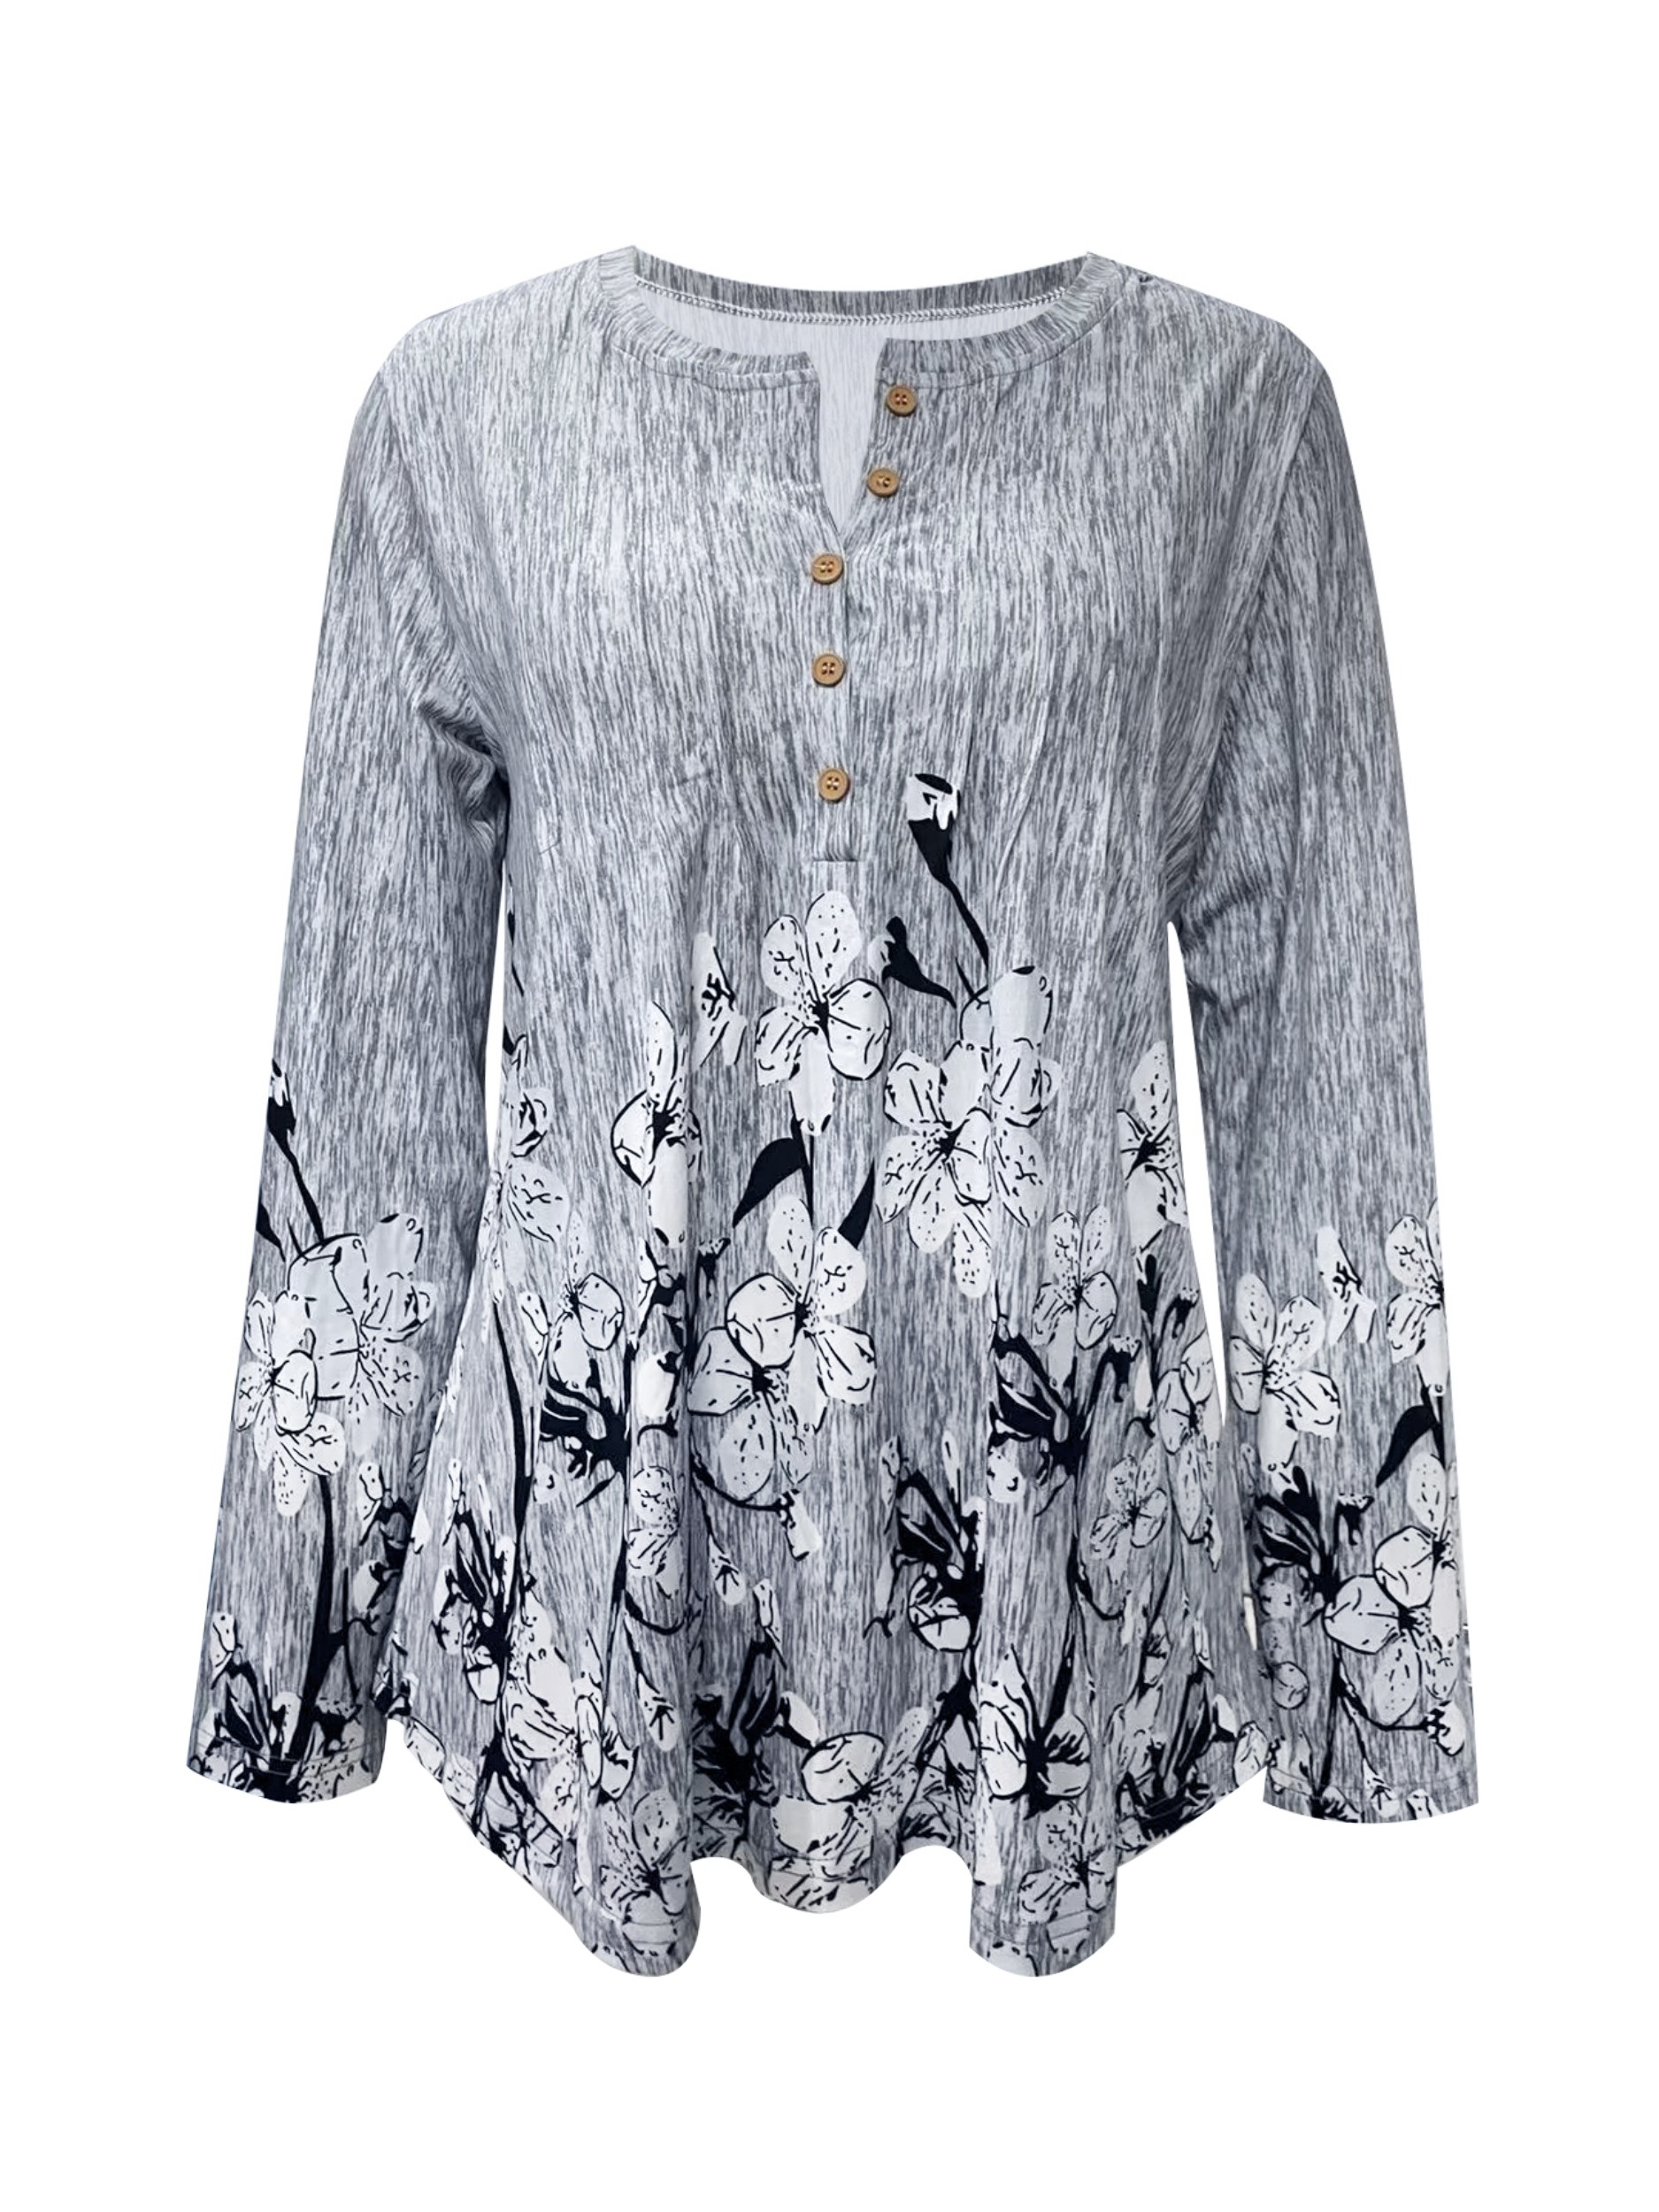 floral print button front t shirt vintage long sleeve t shirt for spring fall womens clothing